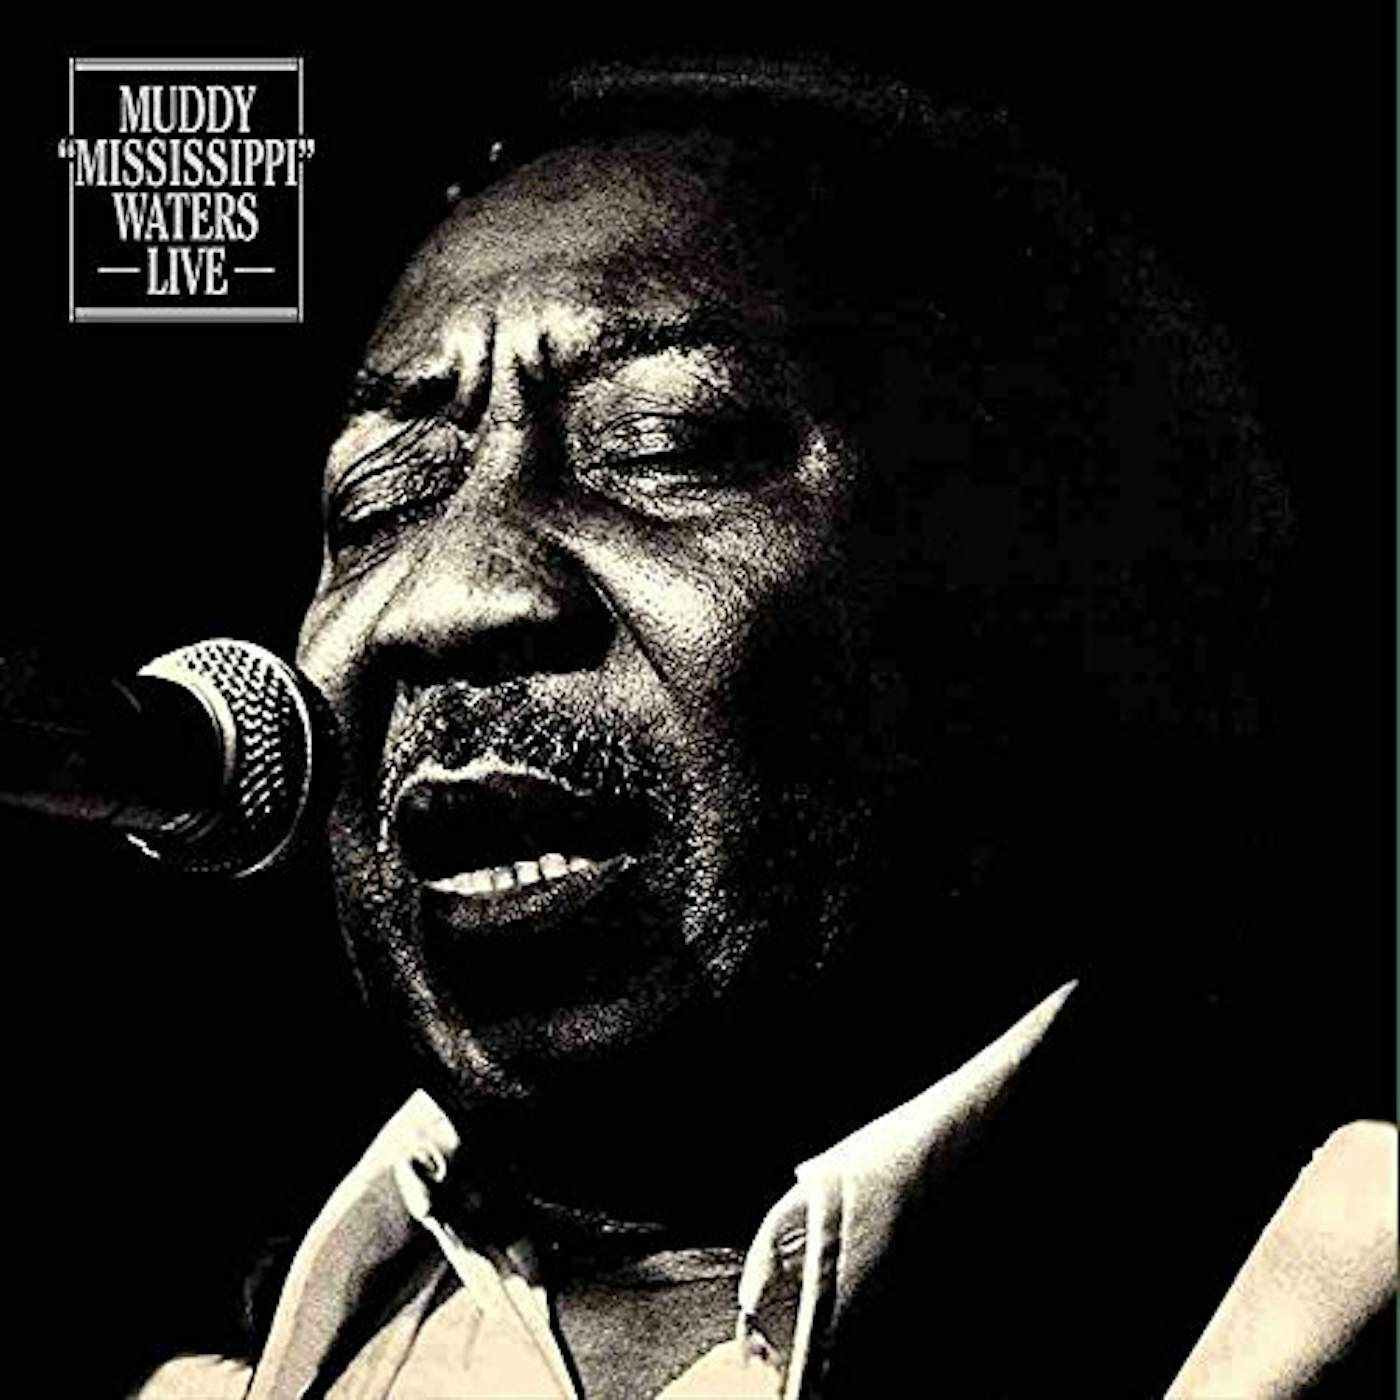 Muddy Waters Blues Band Muddy "Mississippi" Waters Live Vinyl Record